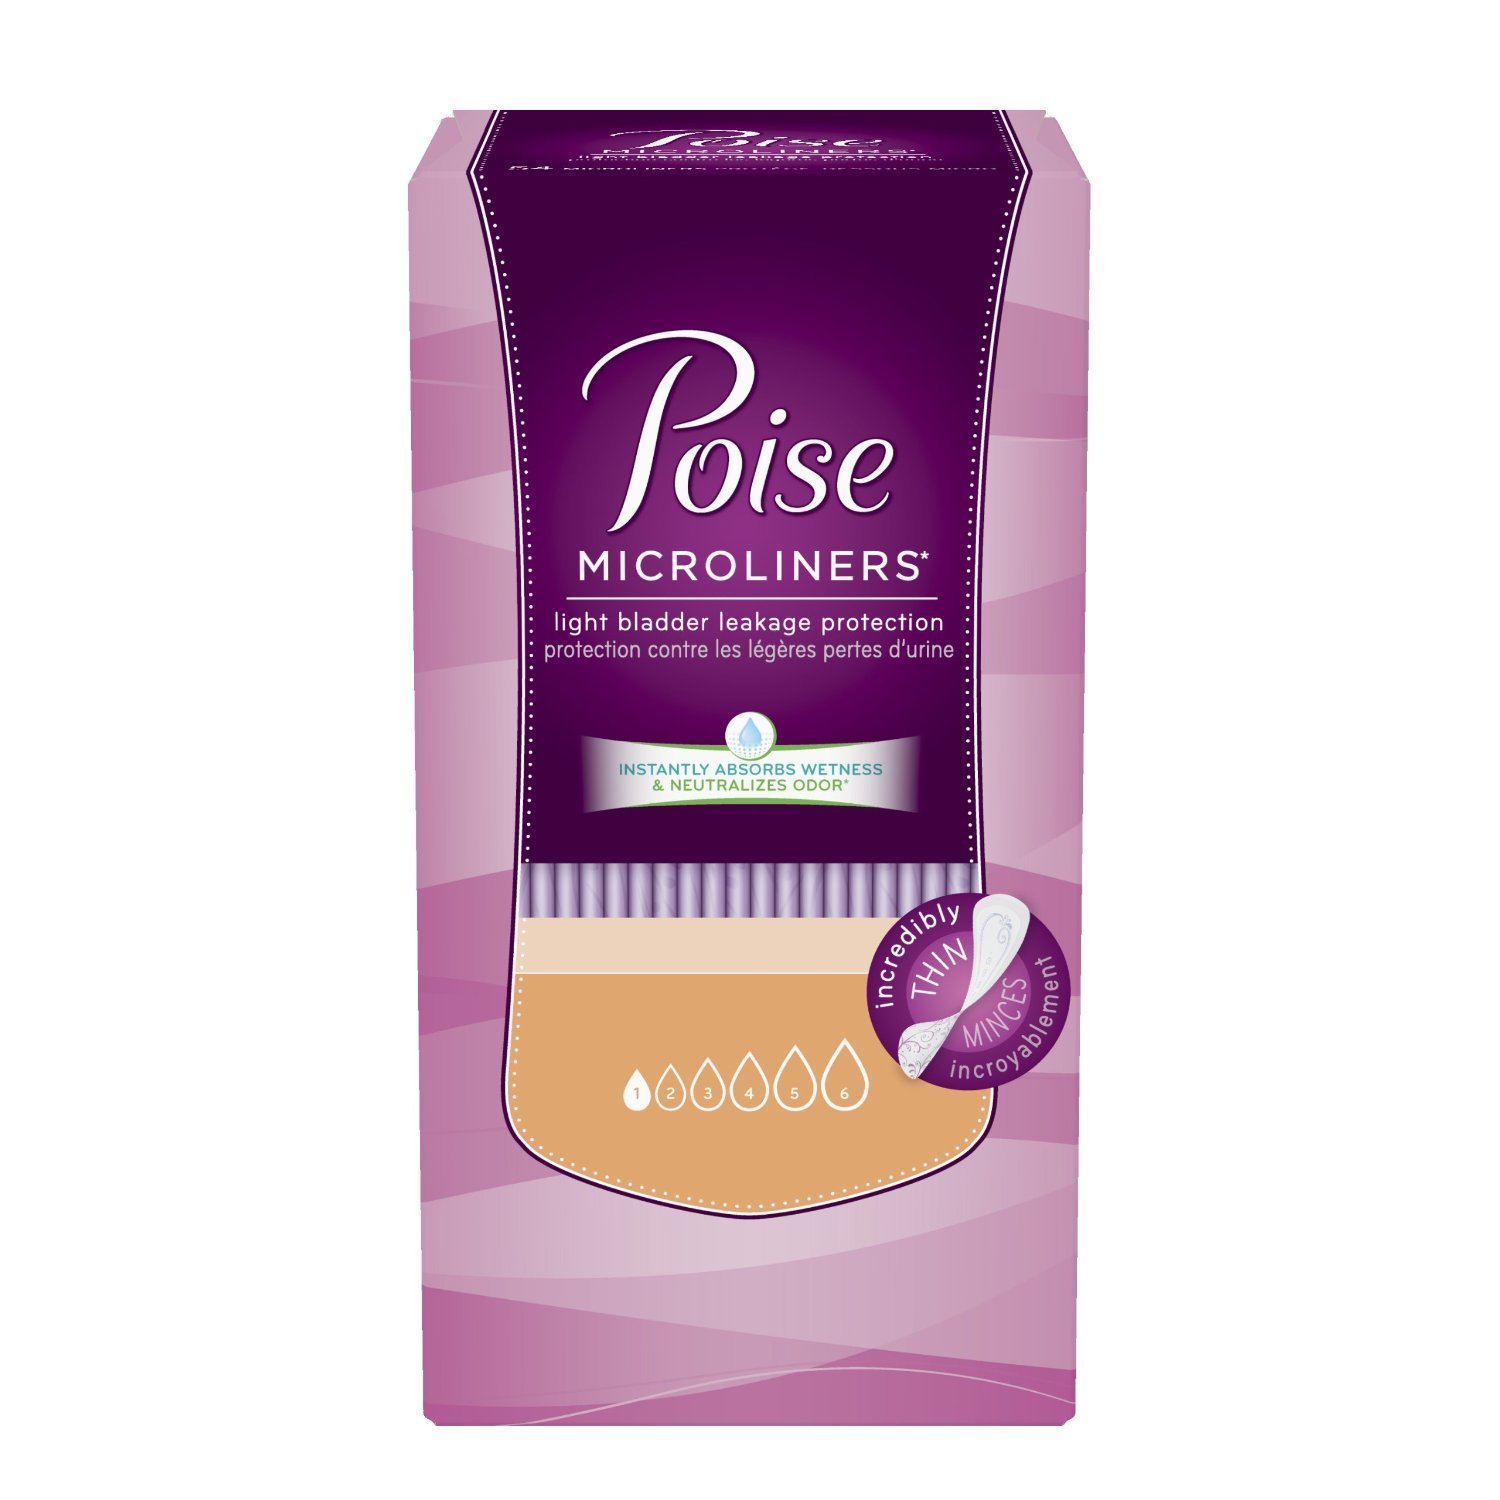 Poise Microliners, Long Length - Lightest Absorbency, 50 Count